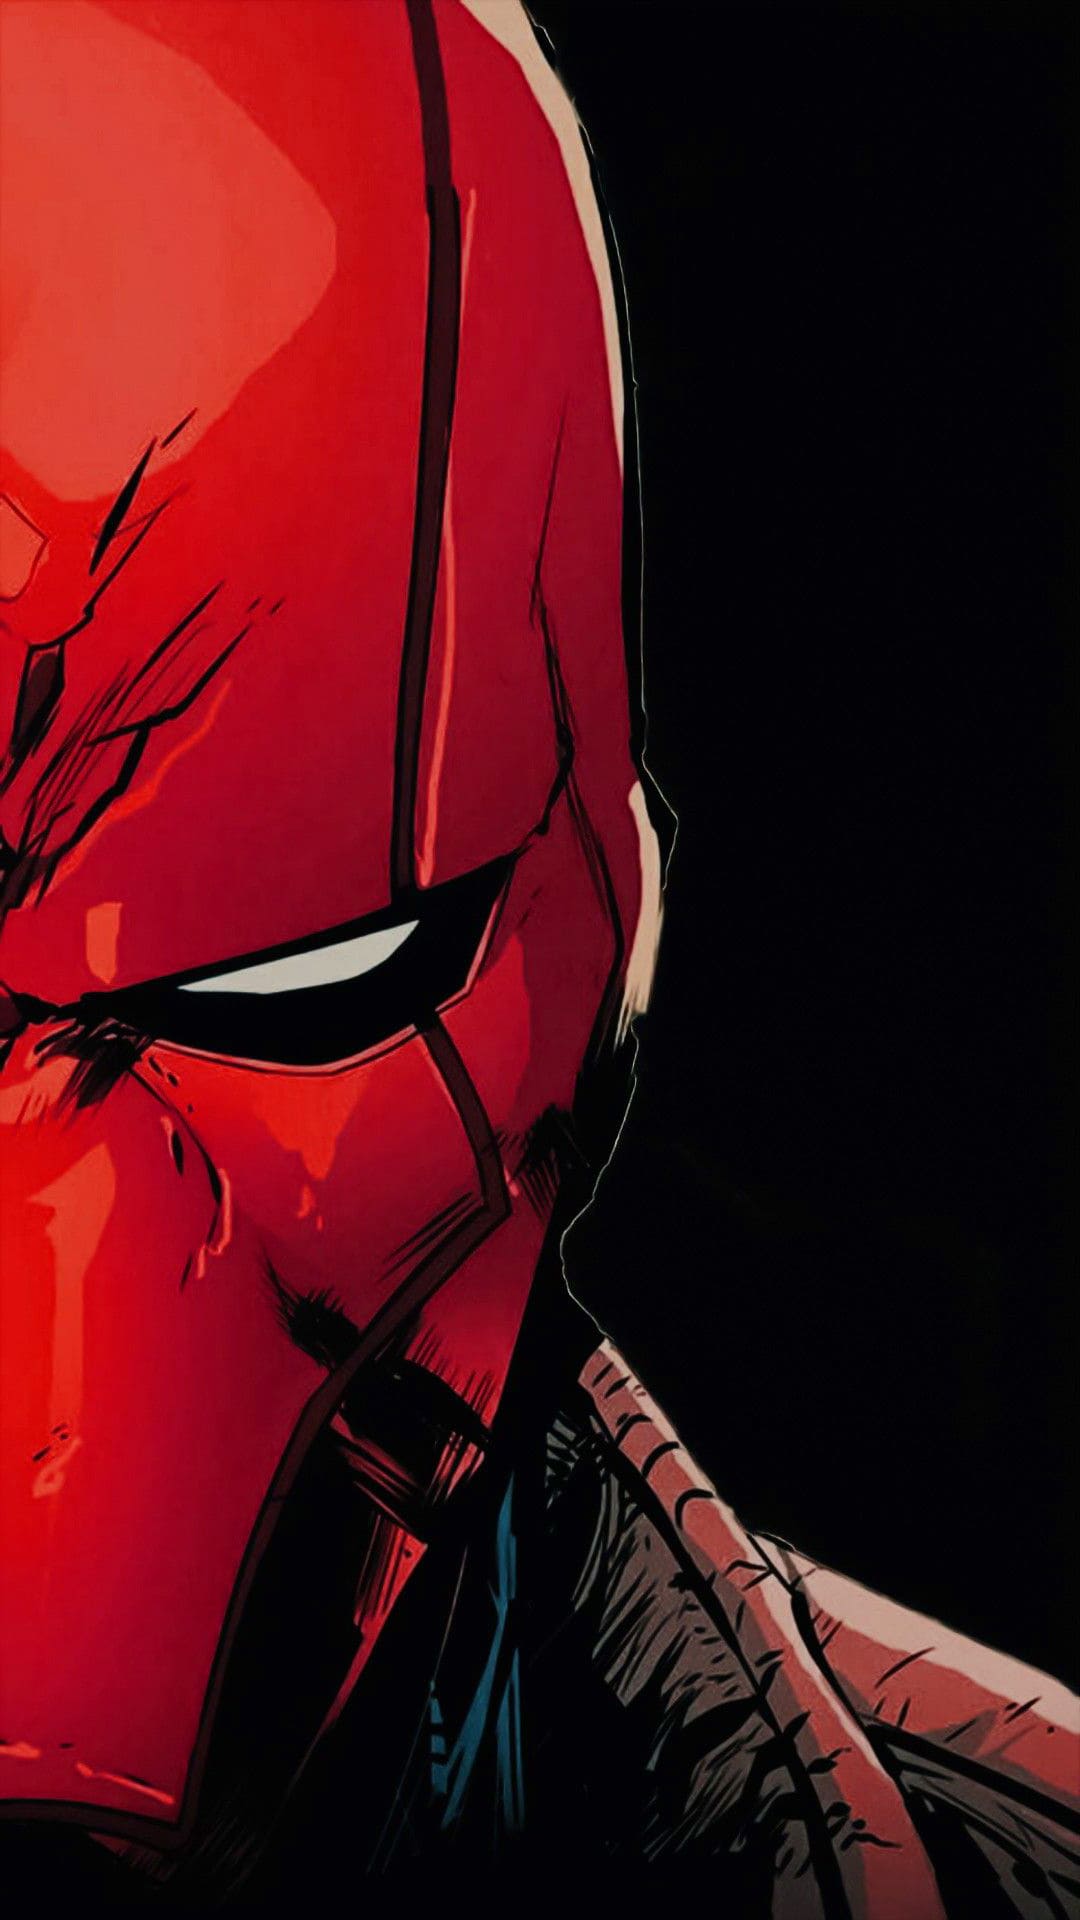 Red Hood Cool Wallpapers